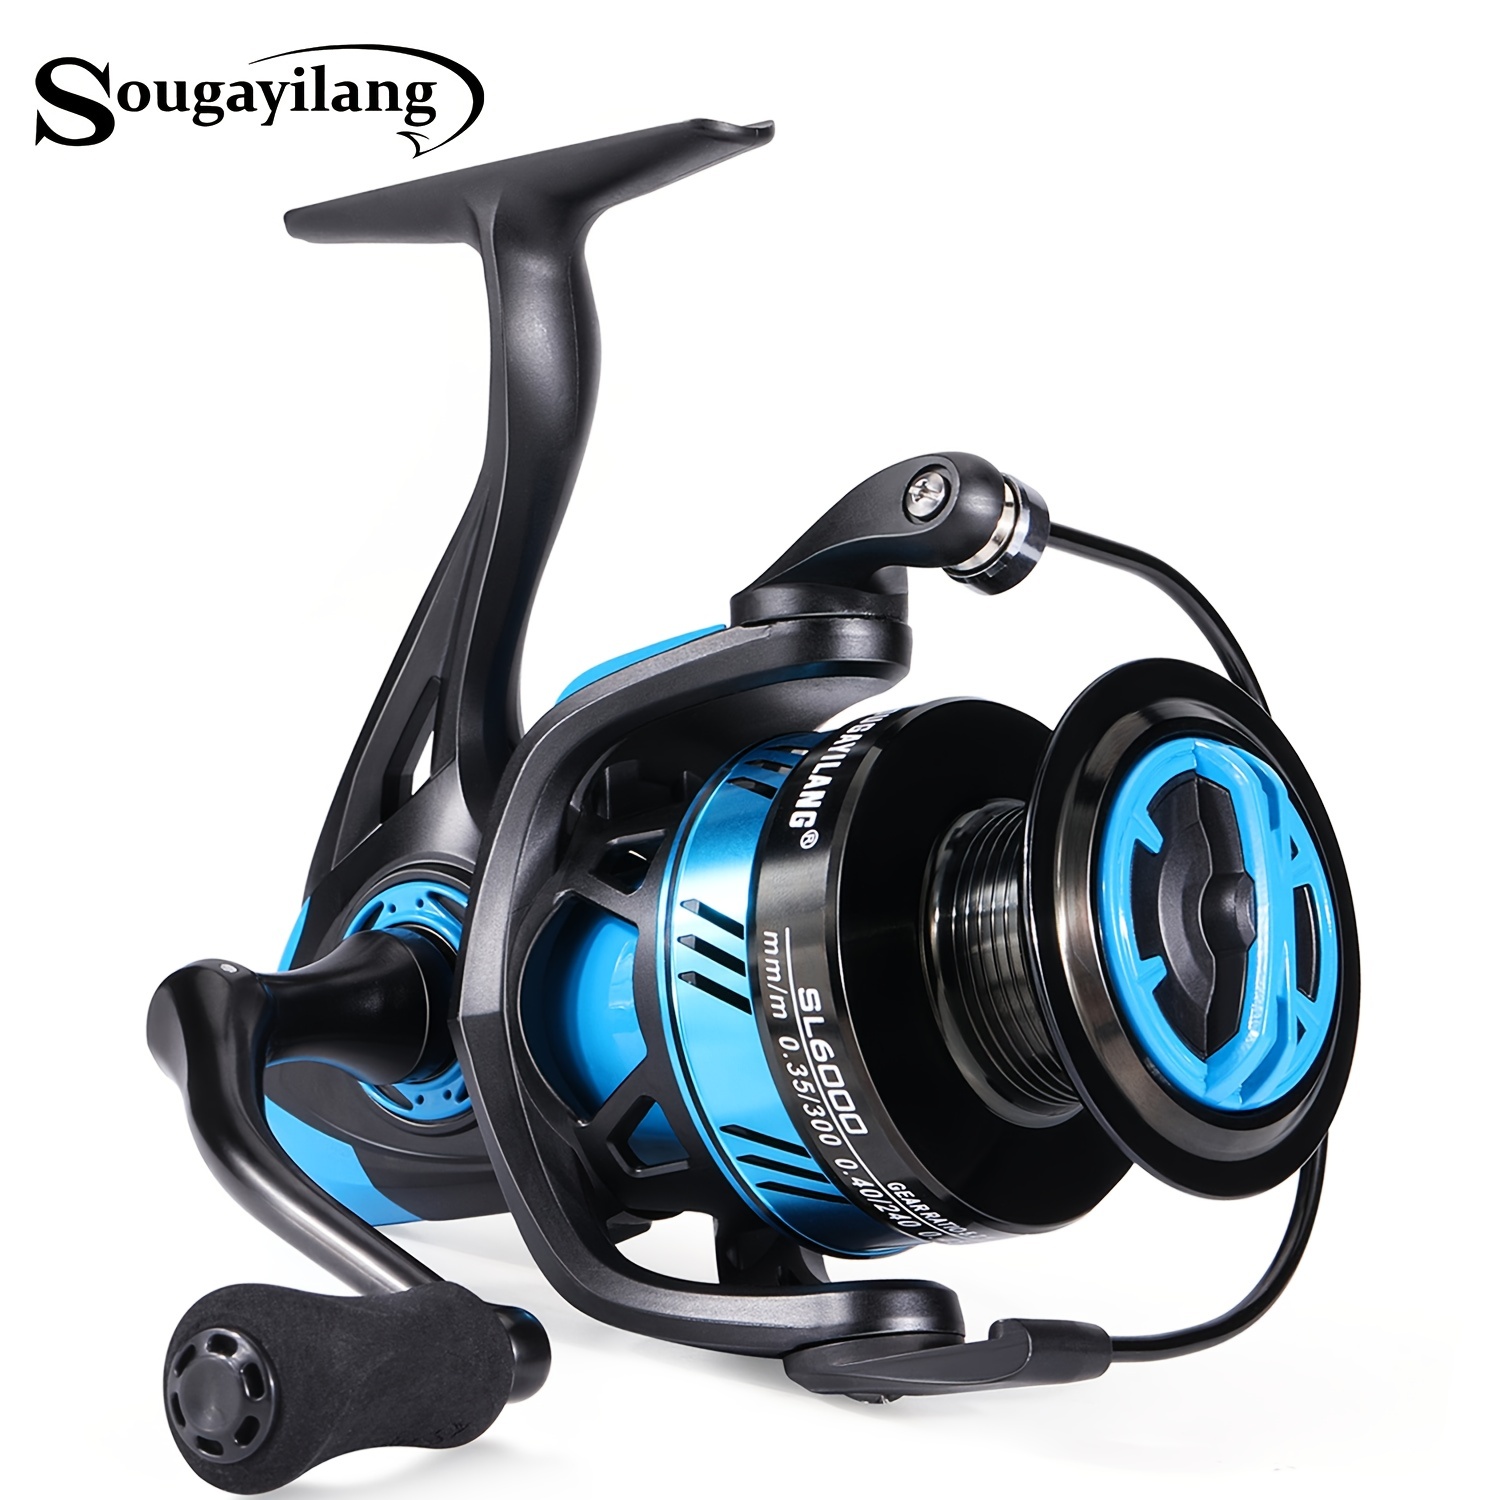 YZ Series Long Casting Spinning Reel - Get Ready for the Ultimate Fishing  Experience in Freshwater and Saltwater!